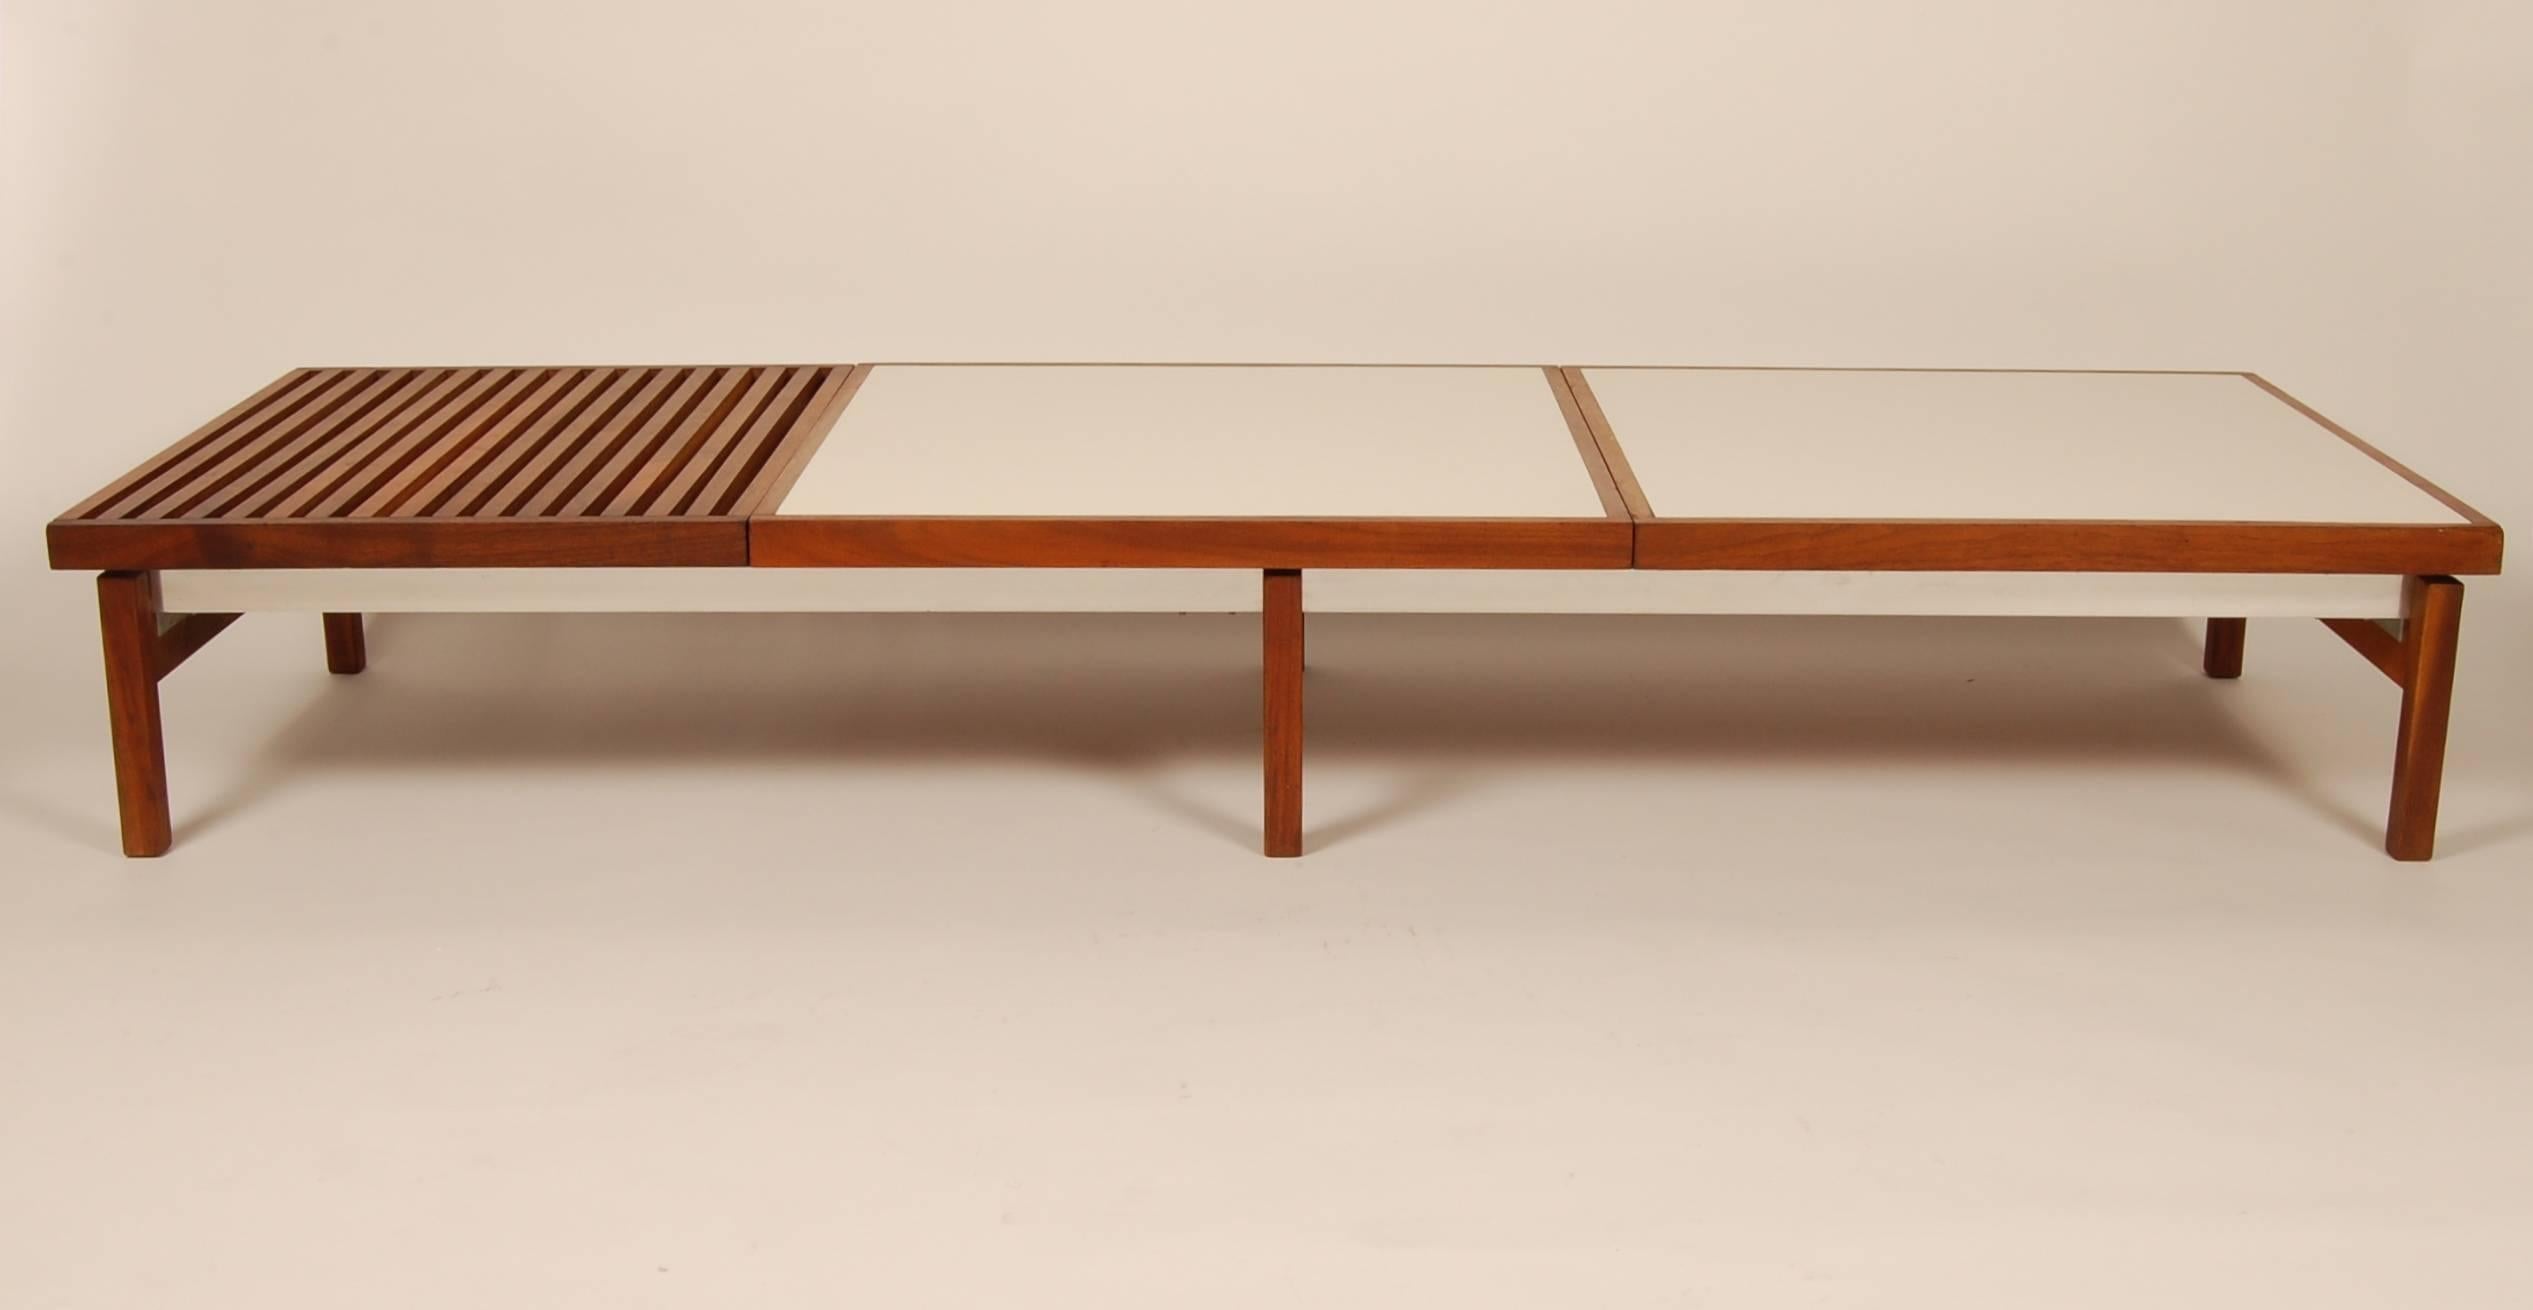 American Case Study Bench / Coffee Table